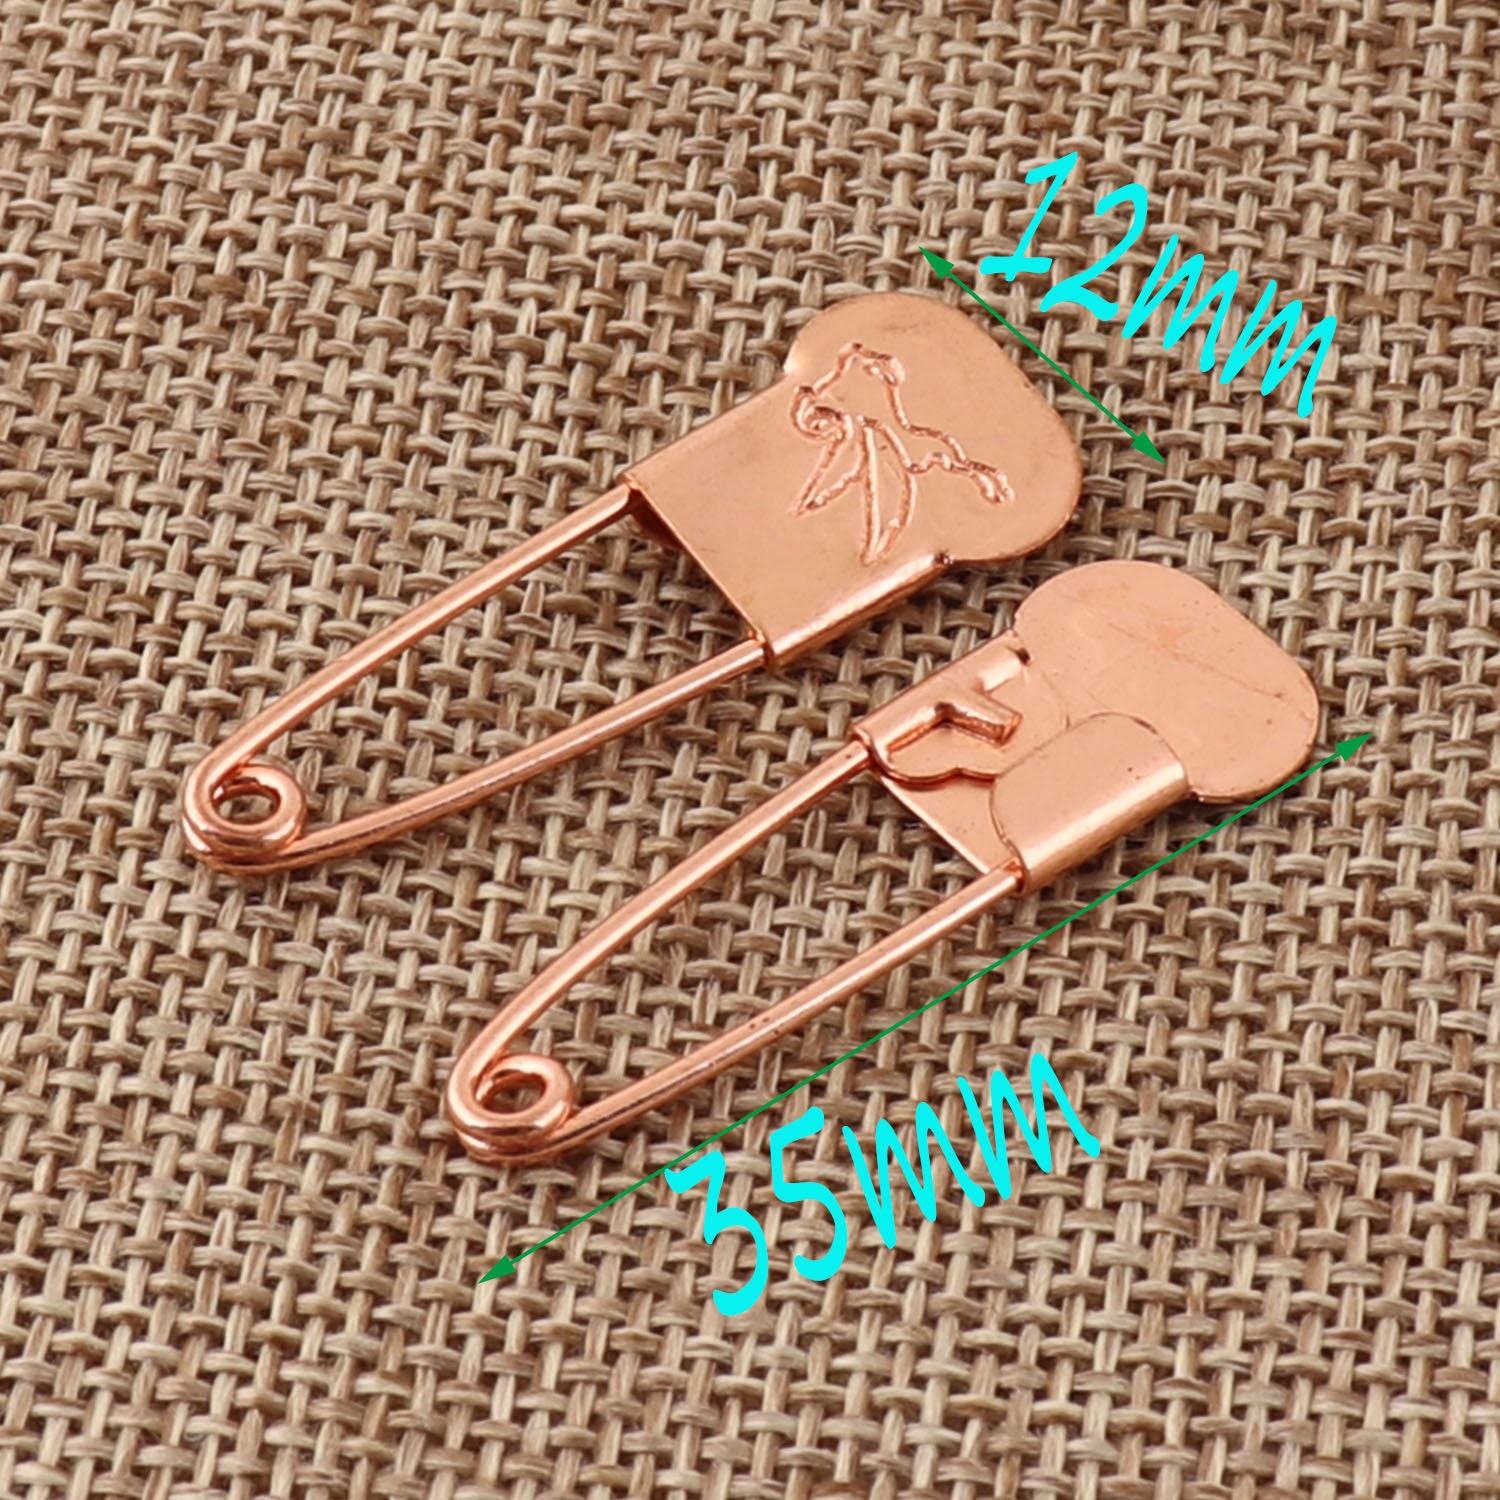 10 Pcs Safety Pin, Metal Safety Pins, 56mm Safety Pin, For Sewing